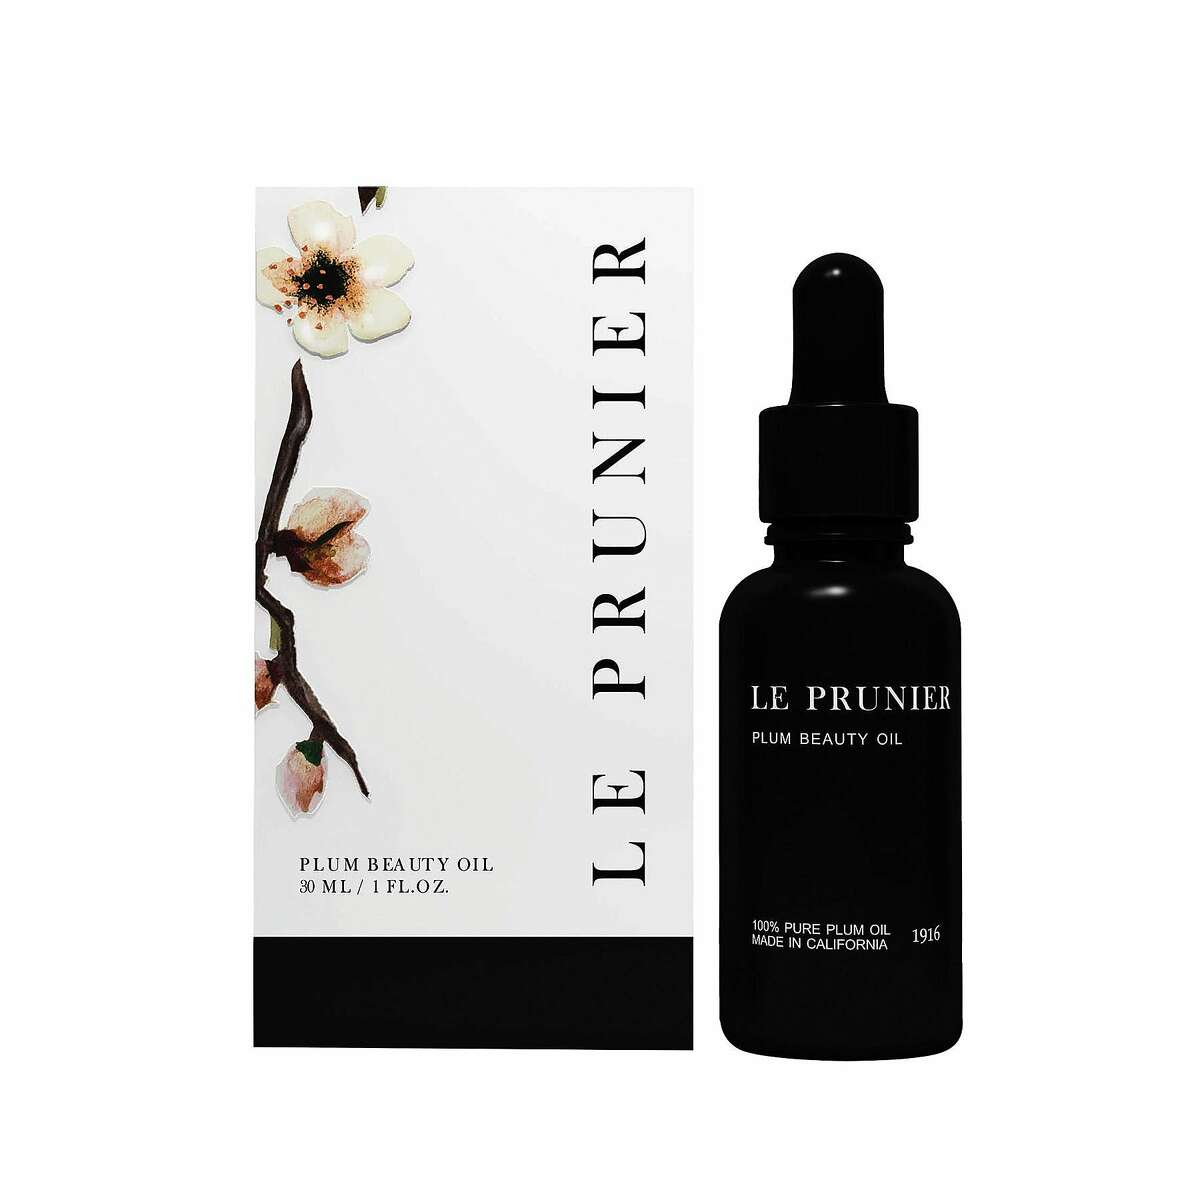 Created by three sisters who come from a 100-year-old farming family, Le Prunier Plum Beauty Oil is a blend of organic plum varietals rich in antioxidants, omega fatty acids, and vitamins A and E. This multi-tasker can be used to moisturize and protect the face and body, tame dehydrated frizzy locks, and treat dry cuticles � it�s basically the Steph Curry of oils. $72, Credo, 2136 Fillmore St., S.F.; www.leprunier.com.